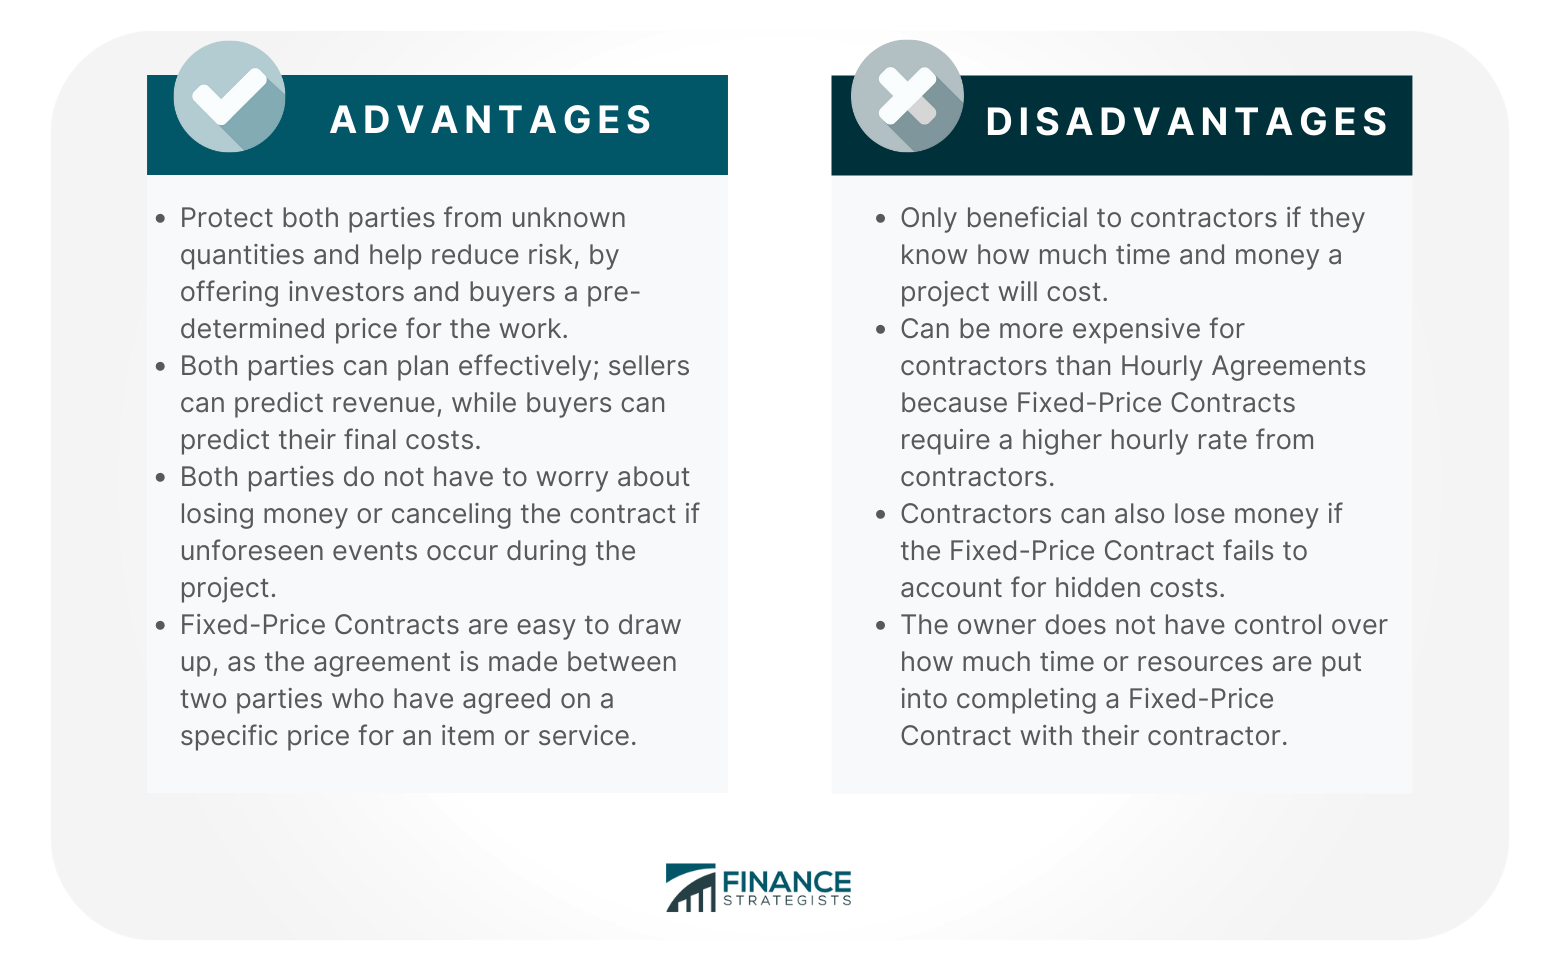 Fixed-Price Contract Advantages and Disadvantages